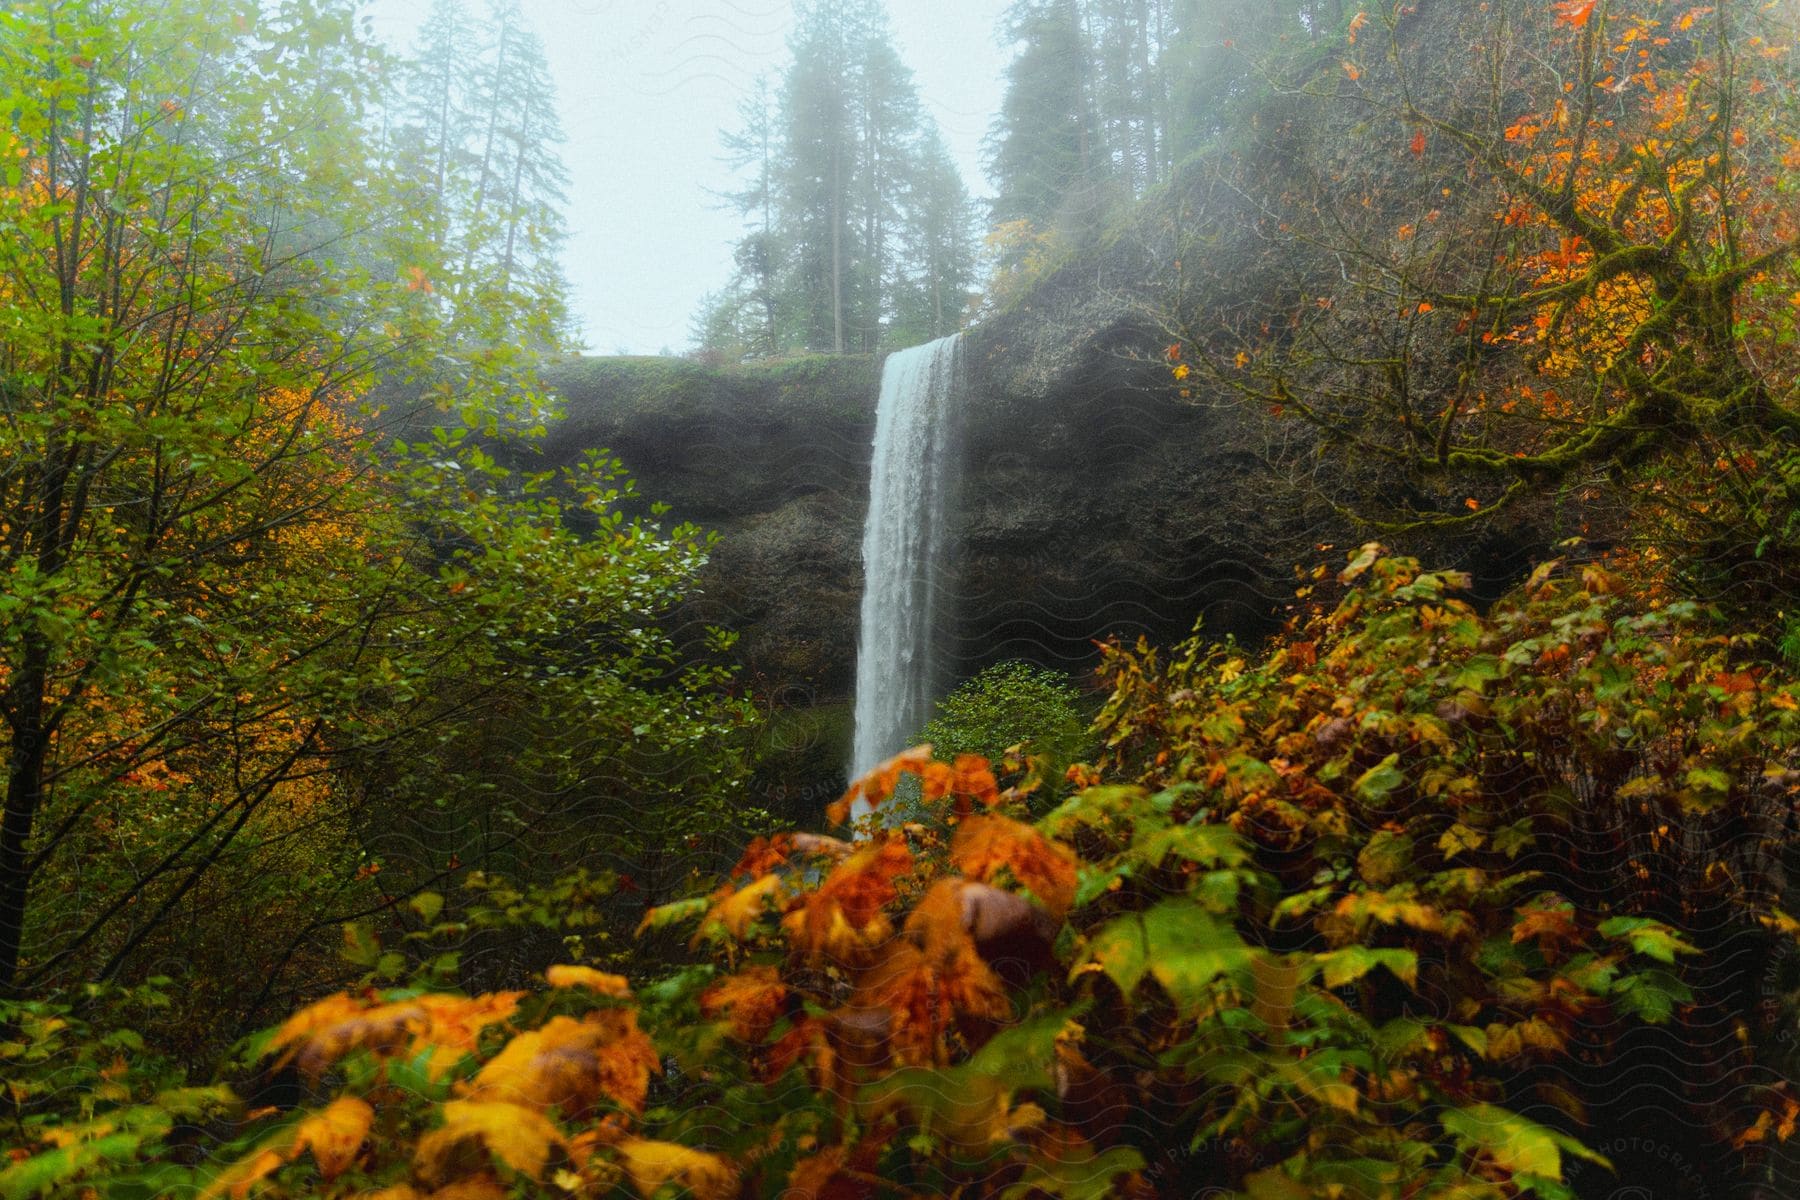 Waterfall flows down cliff topped with conifers into area surrounded by trees with autumn foliage.